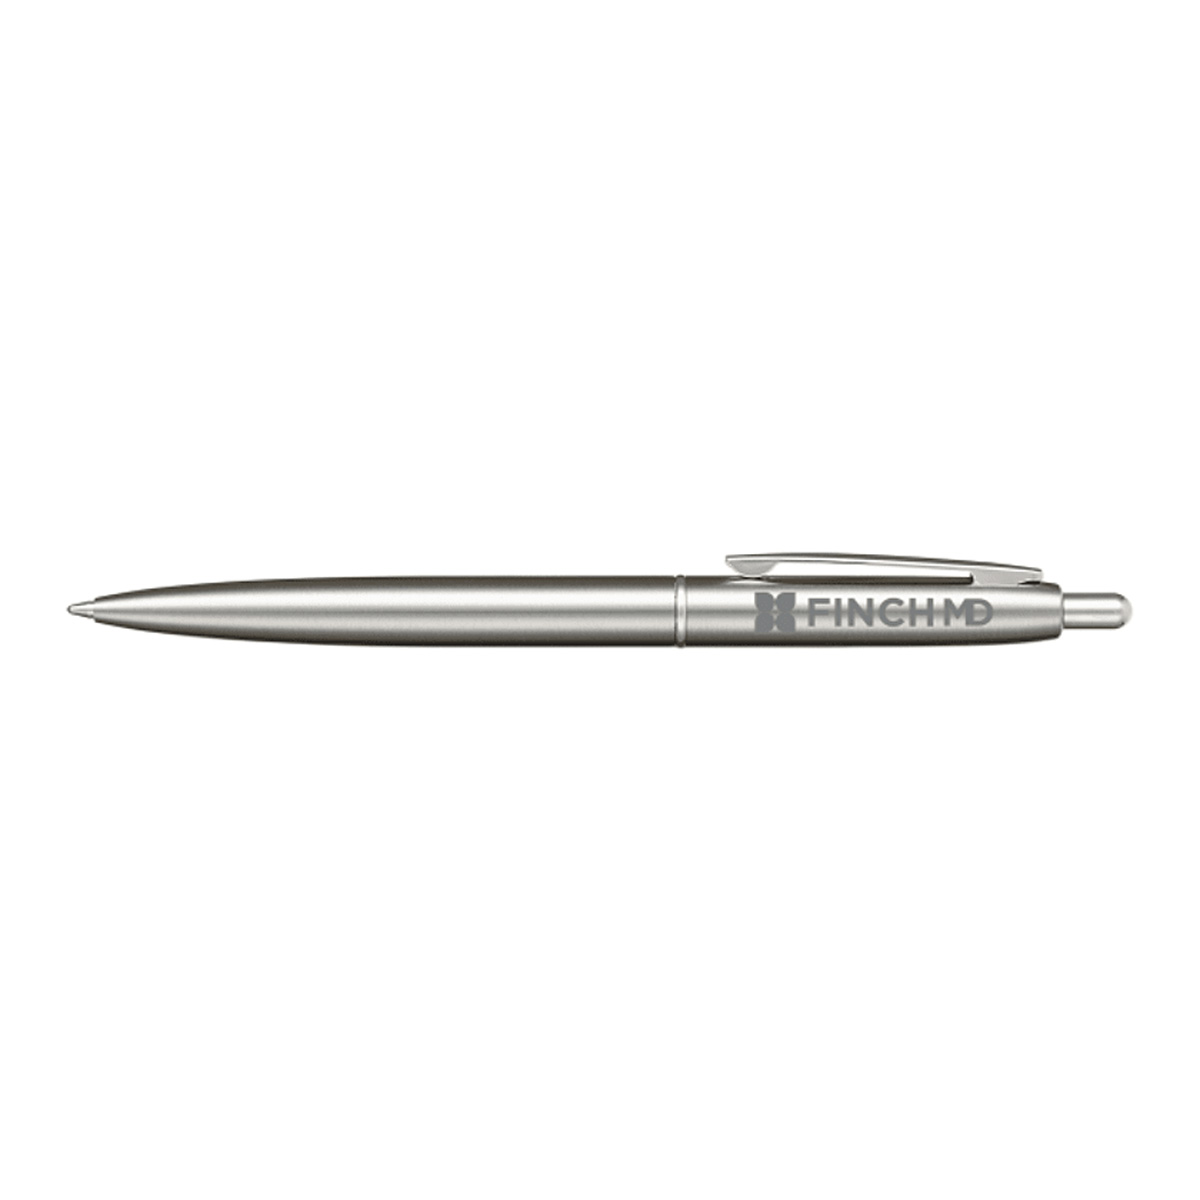 Recycled Stainless Steel Ballpoint Pen | Refillable